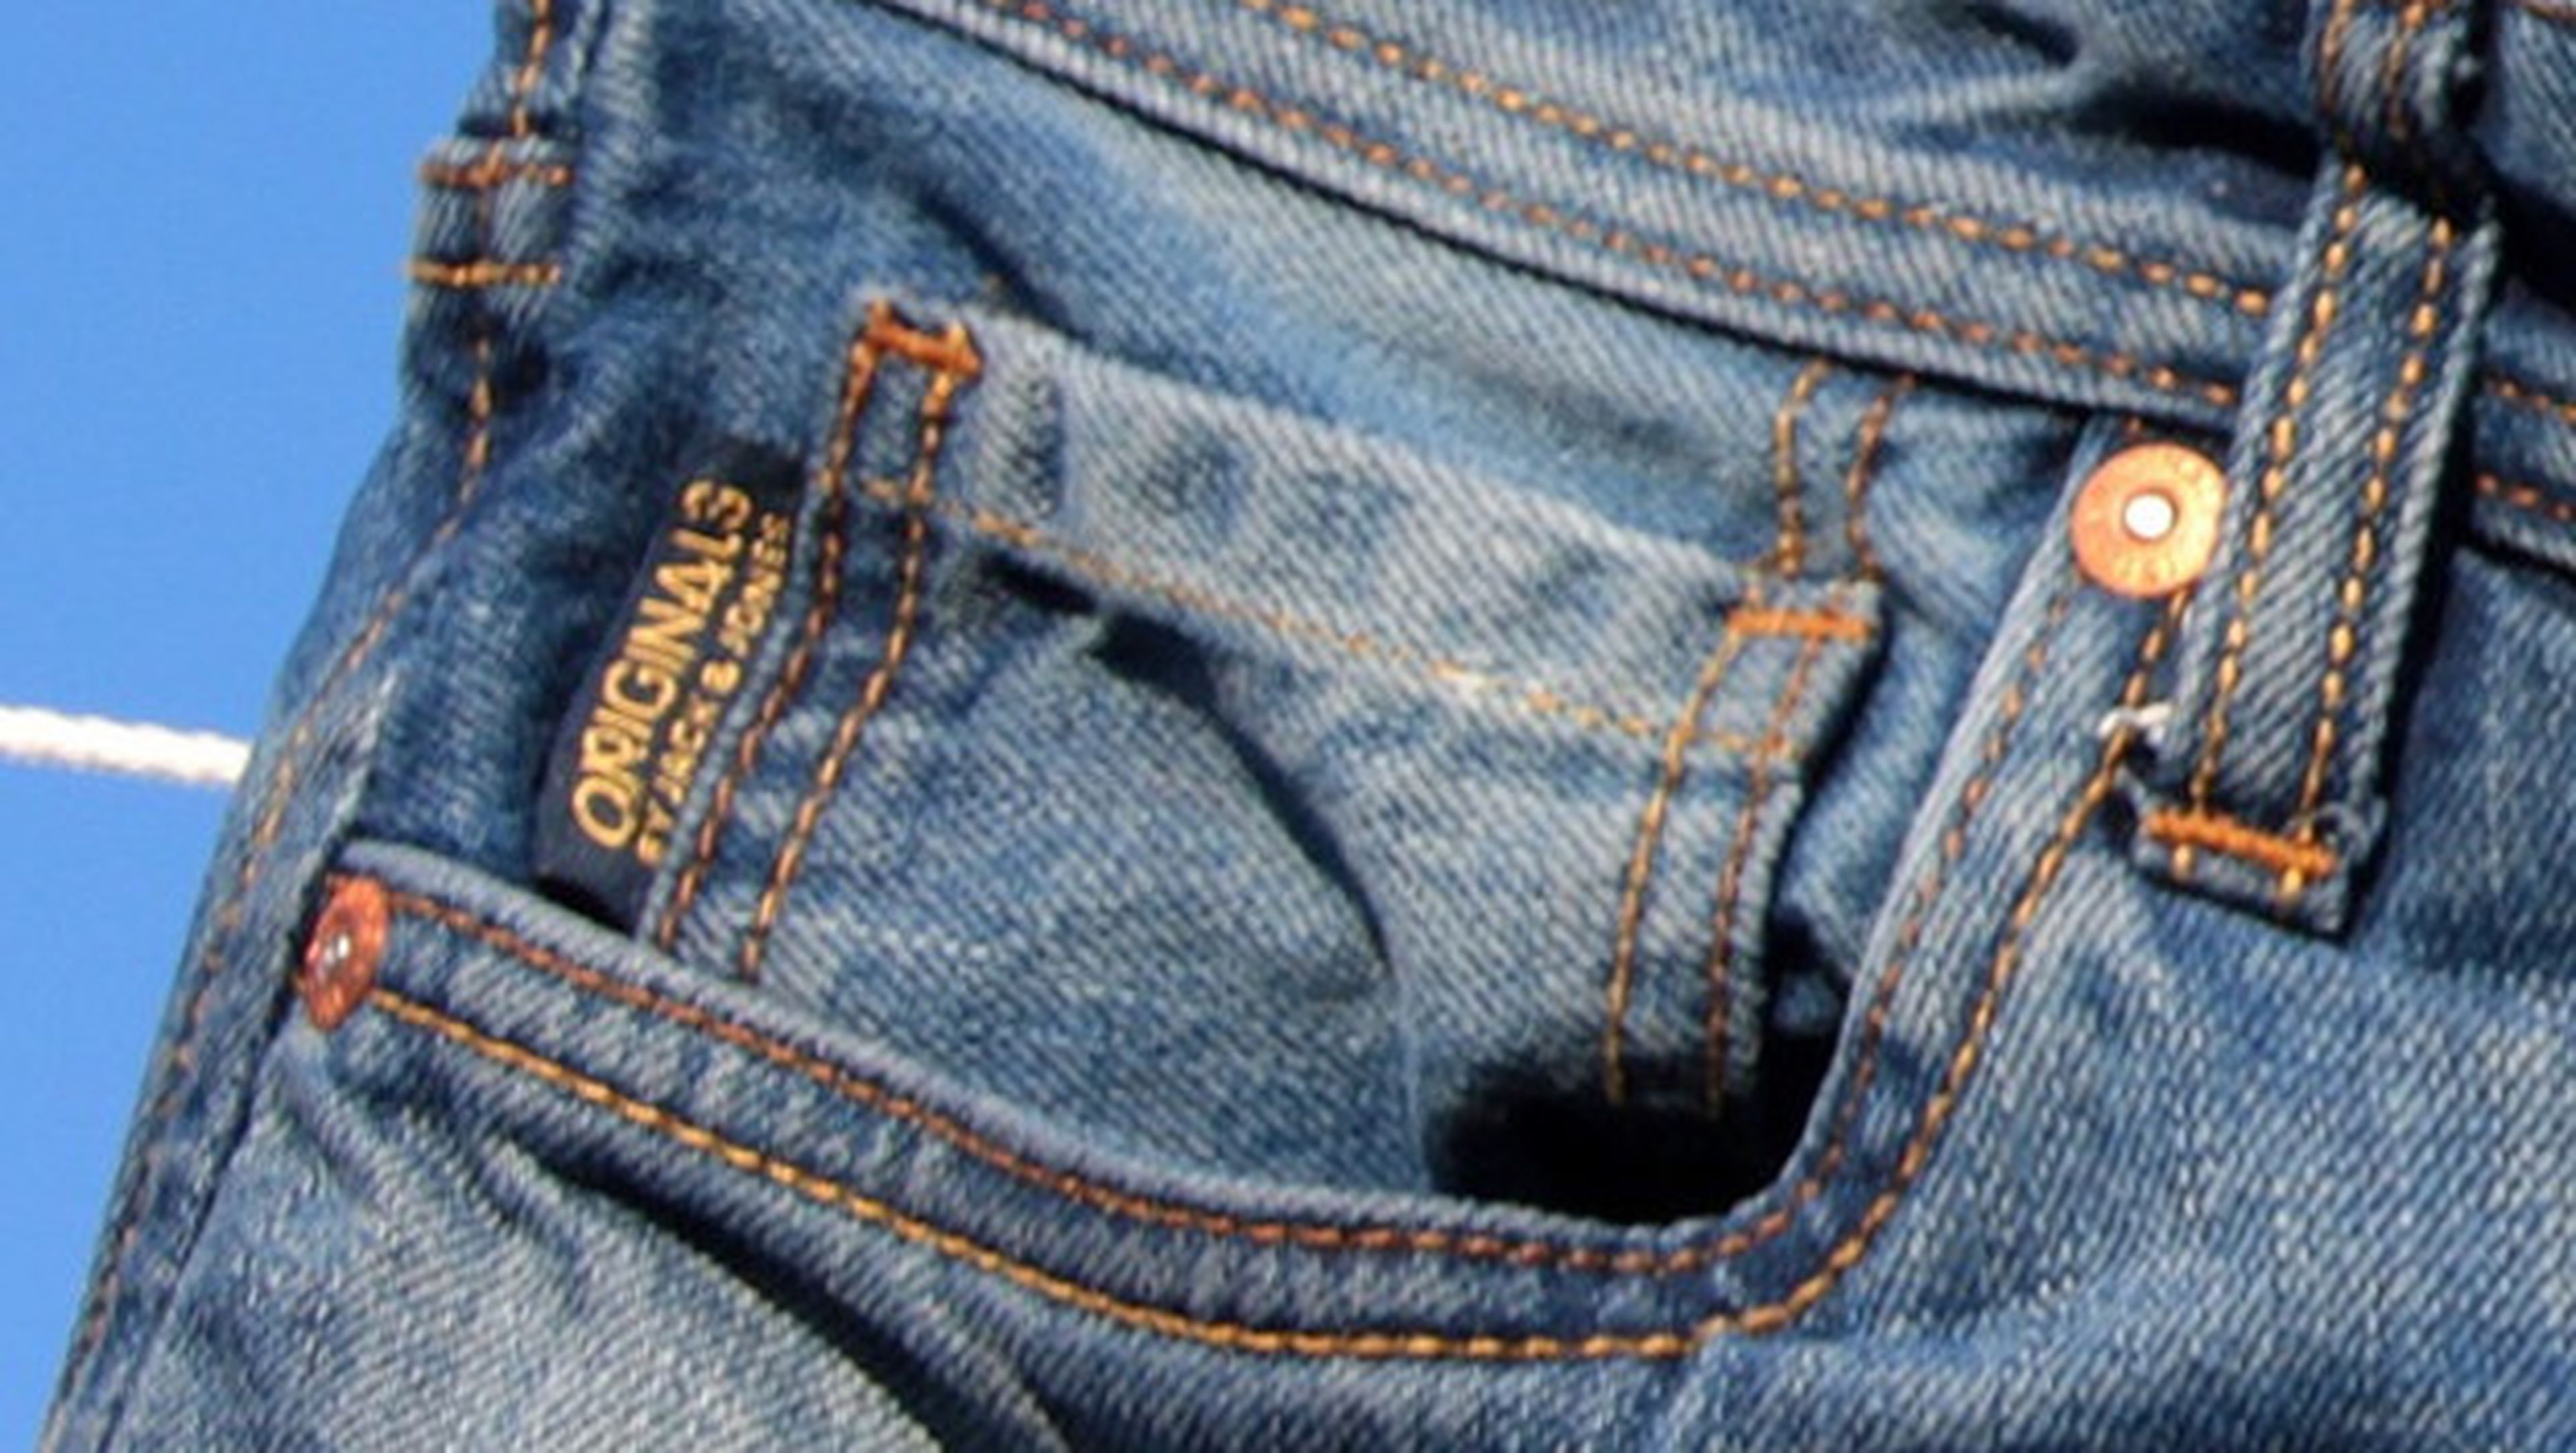 What is the small pocket of jeans for?